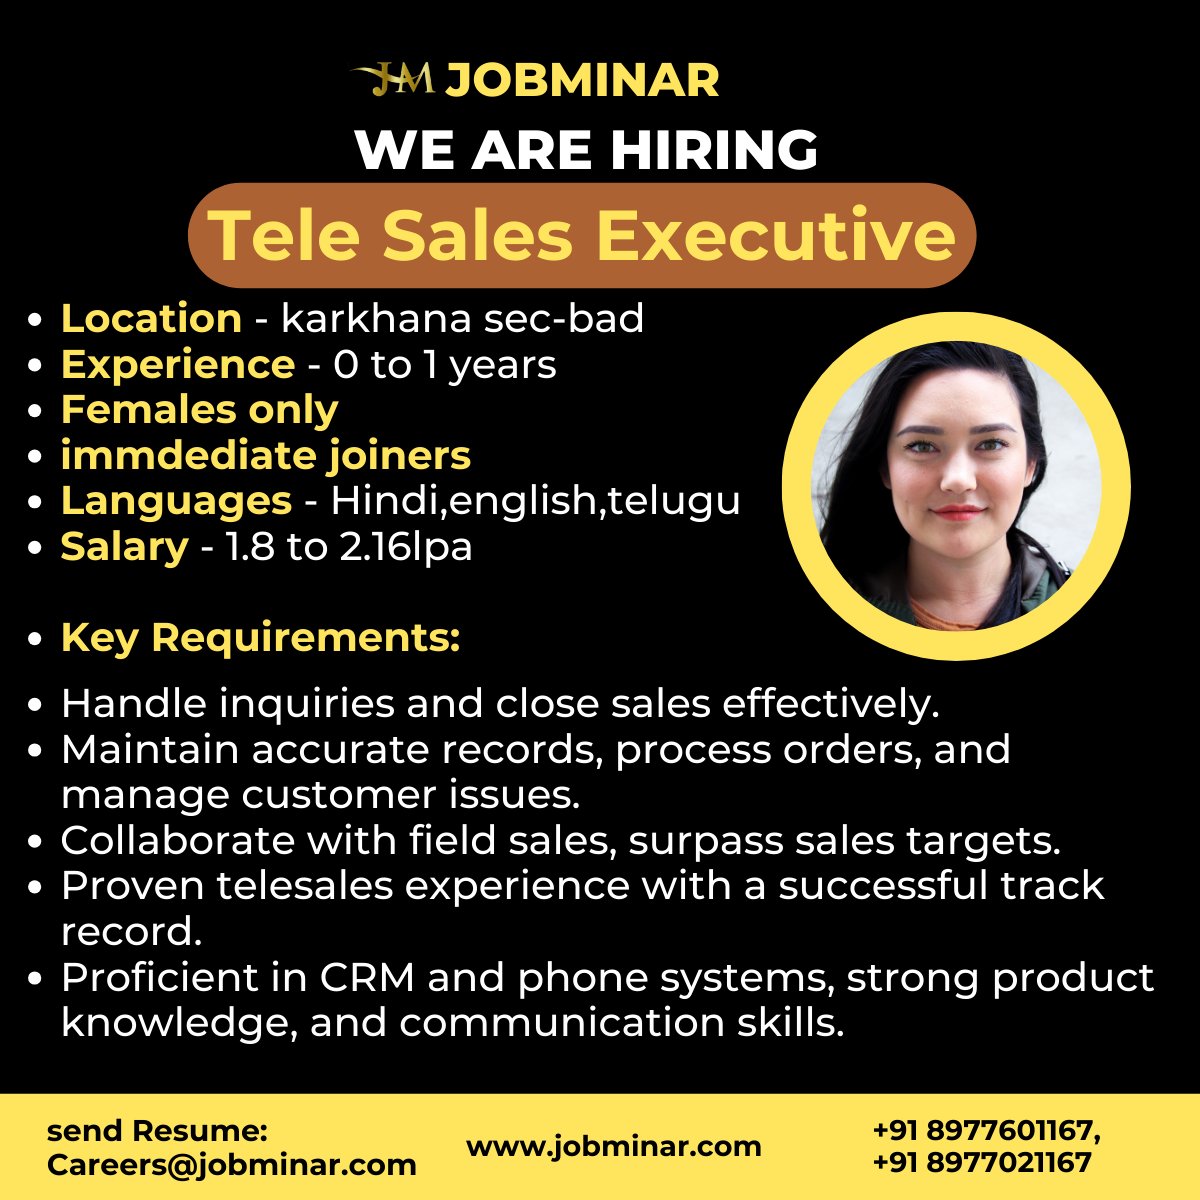 we are hiring for tele Sales Executive with 0 to 1 years of experience for karkhana, secunderabad location
if anyone is intrested please share your resume on careers@jobminar.com
or feel free to reach out to us on +91 8977601167,+91 8977021167
#TeleSalesJobs #SalesExecutive #Job